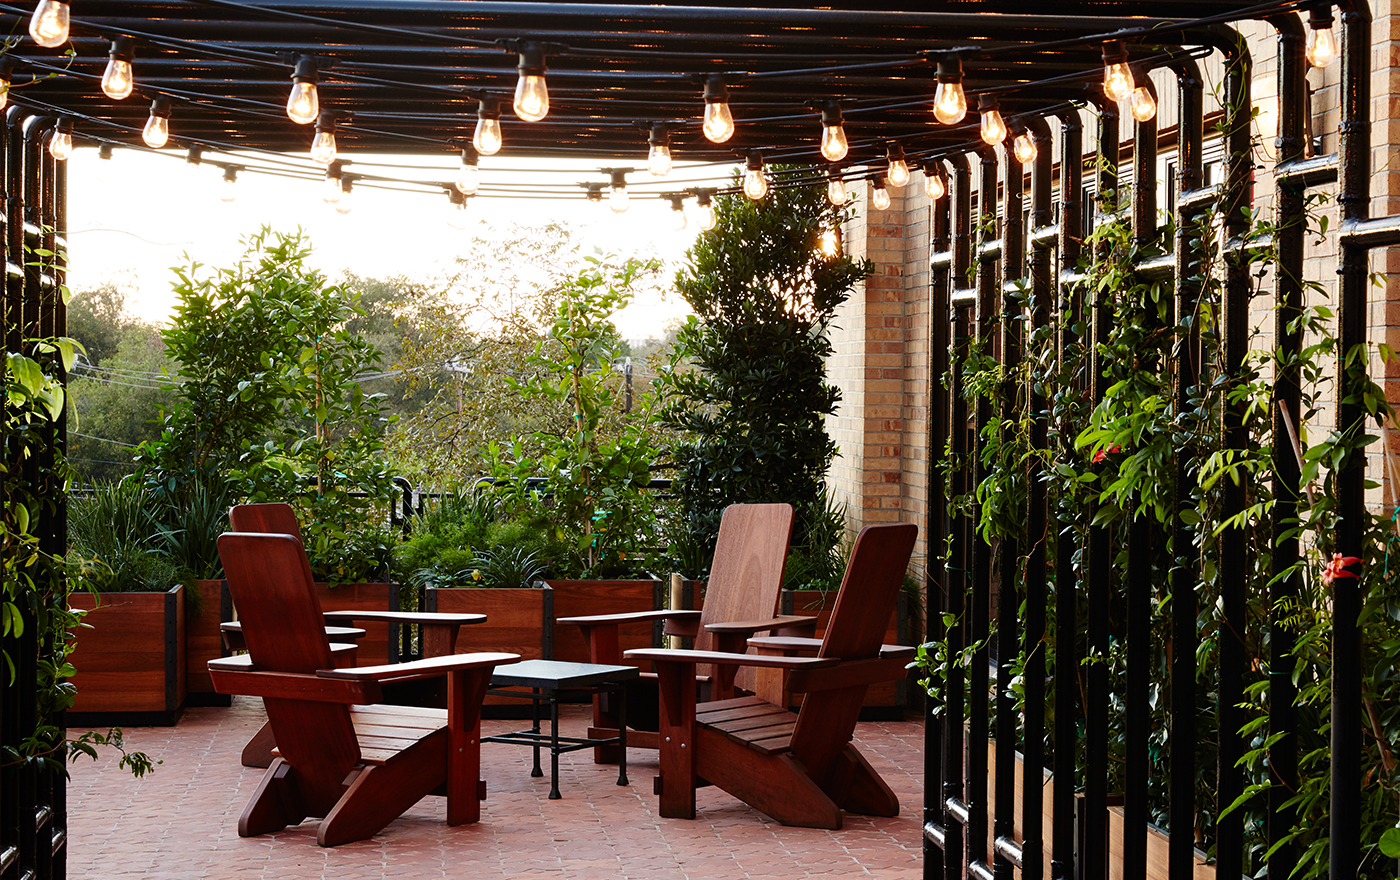 Picture of an outside patio with seating at Hotel Emma.